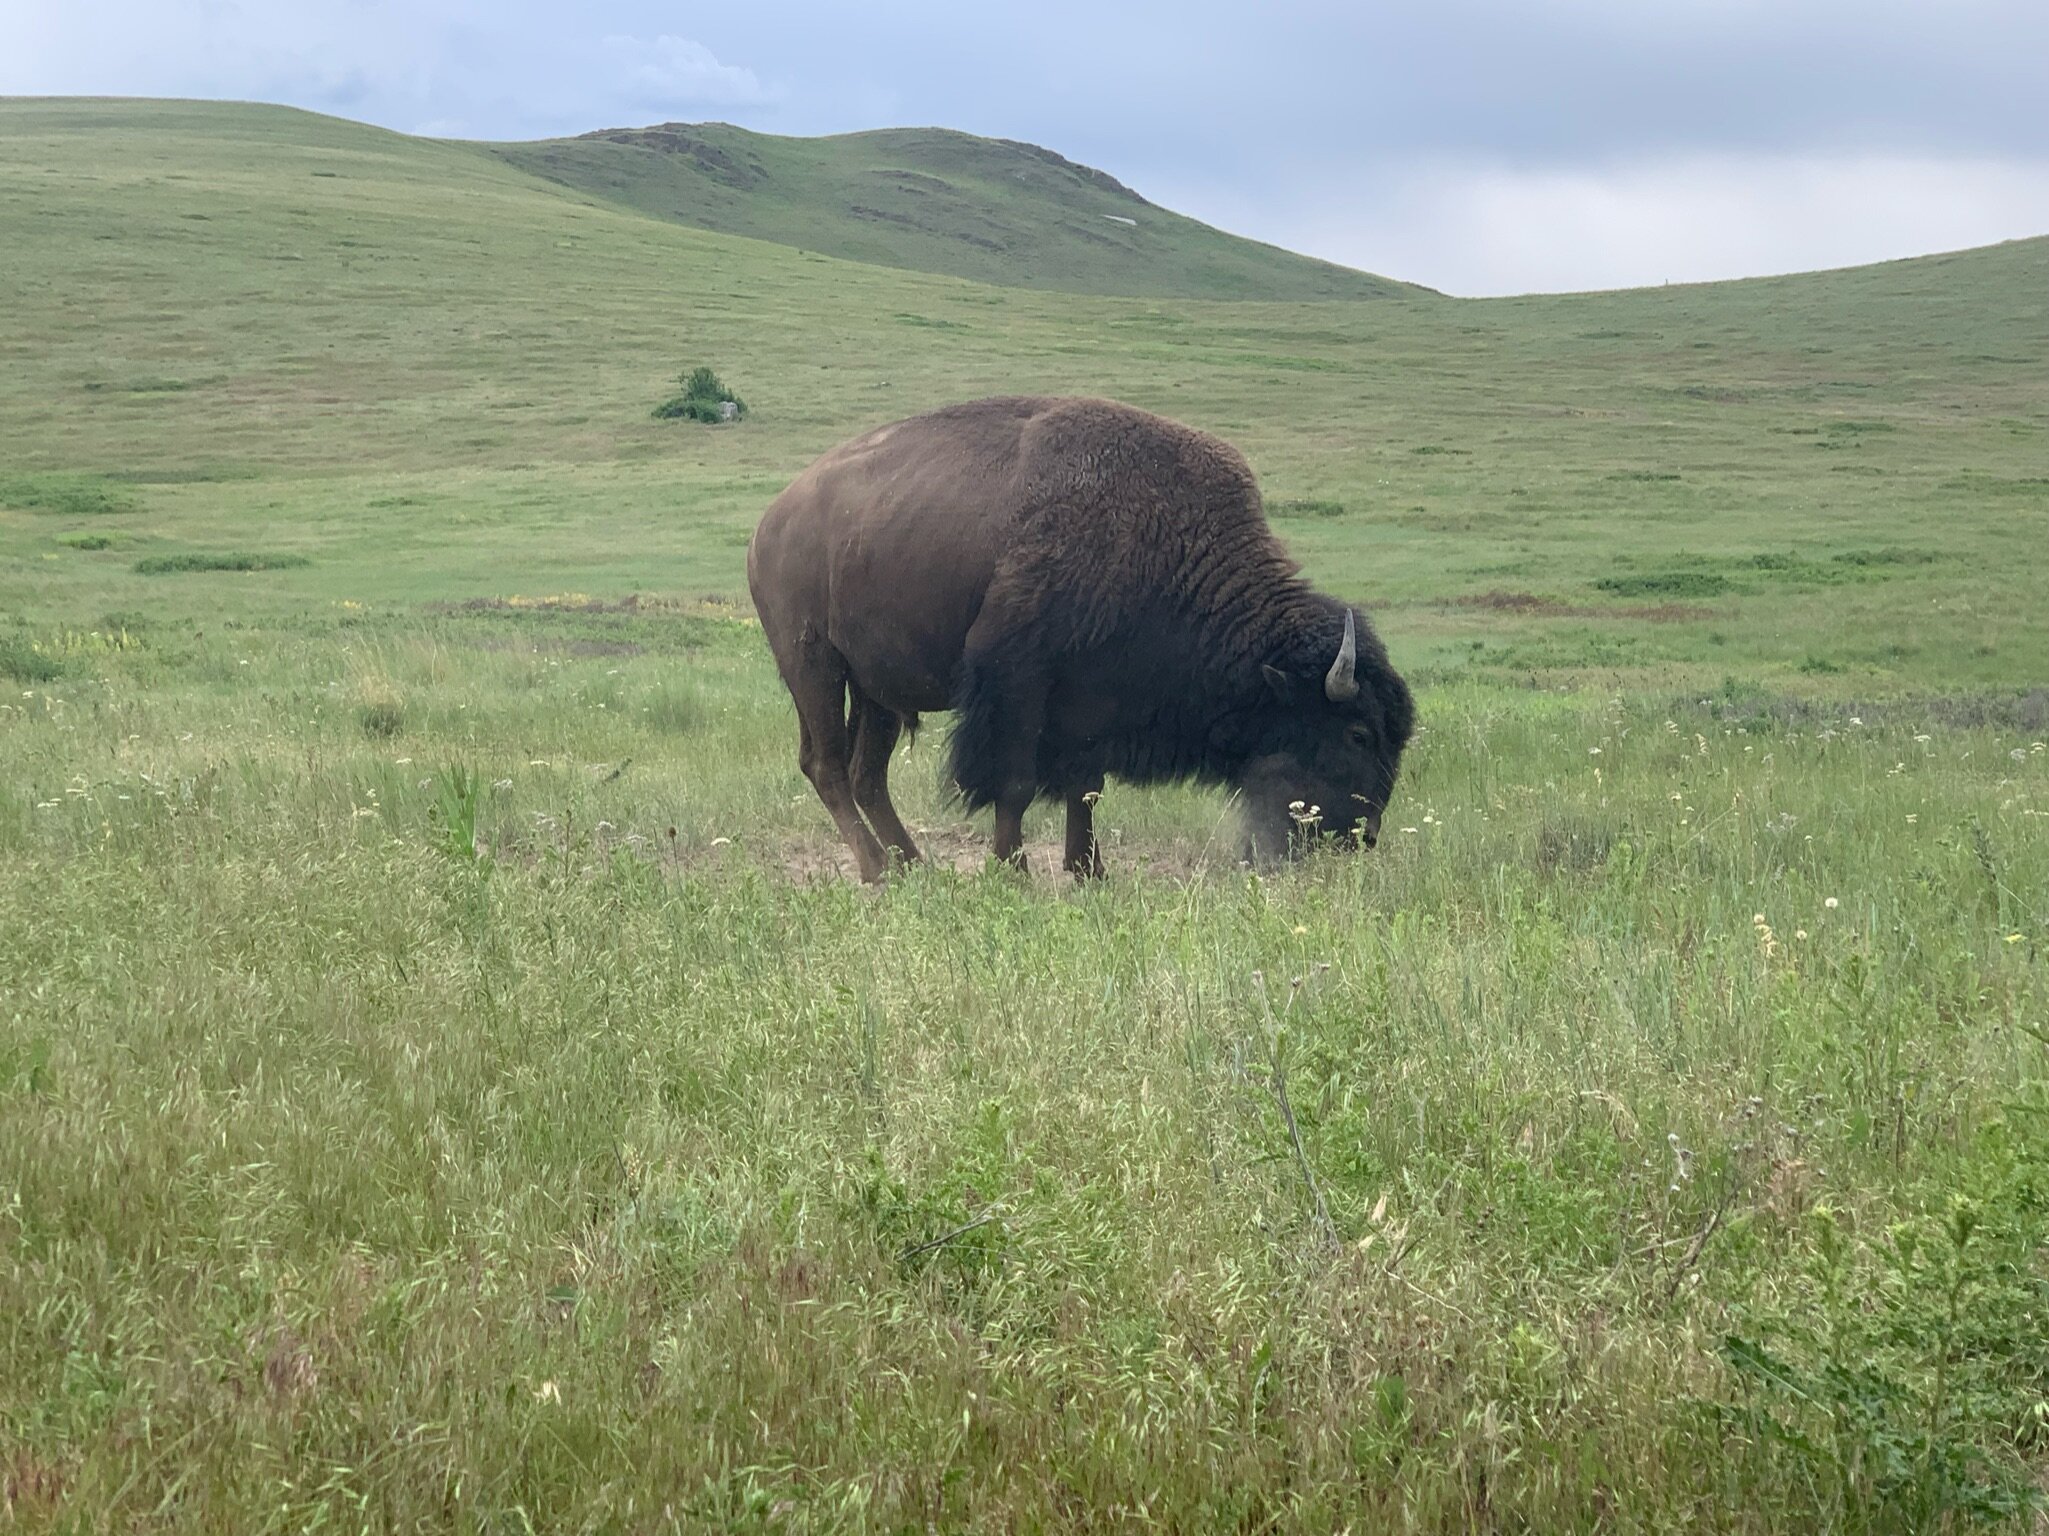 A bison at the National Bison Range in Charlo, Montana